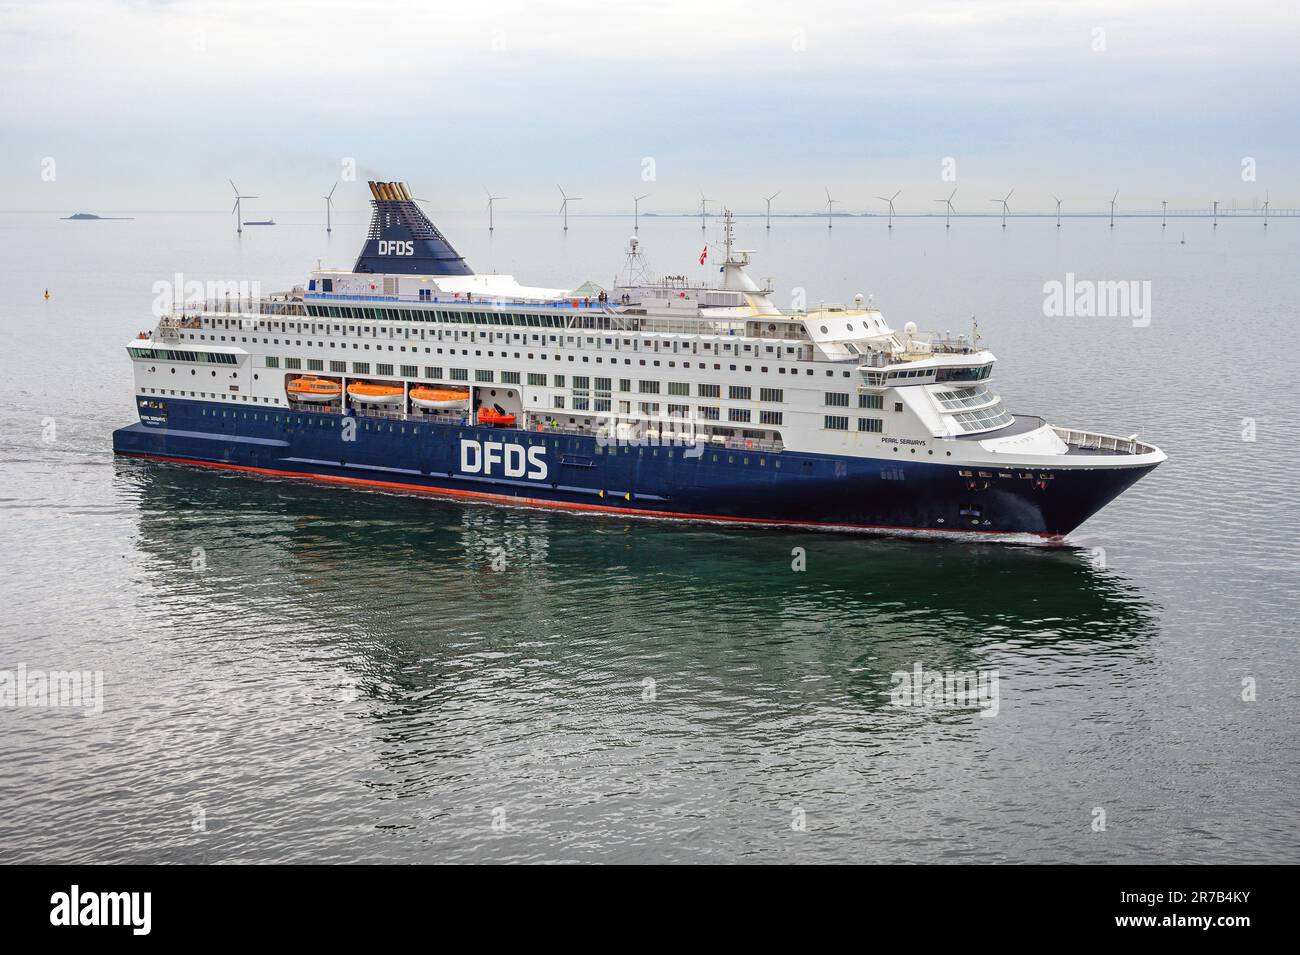 Pearl Seaways is a cruise ferry operated by the Danish shipping company DFDS on the the Copenhagen-Frederikshavn-Oslo route. Stock Photo